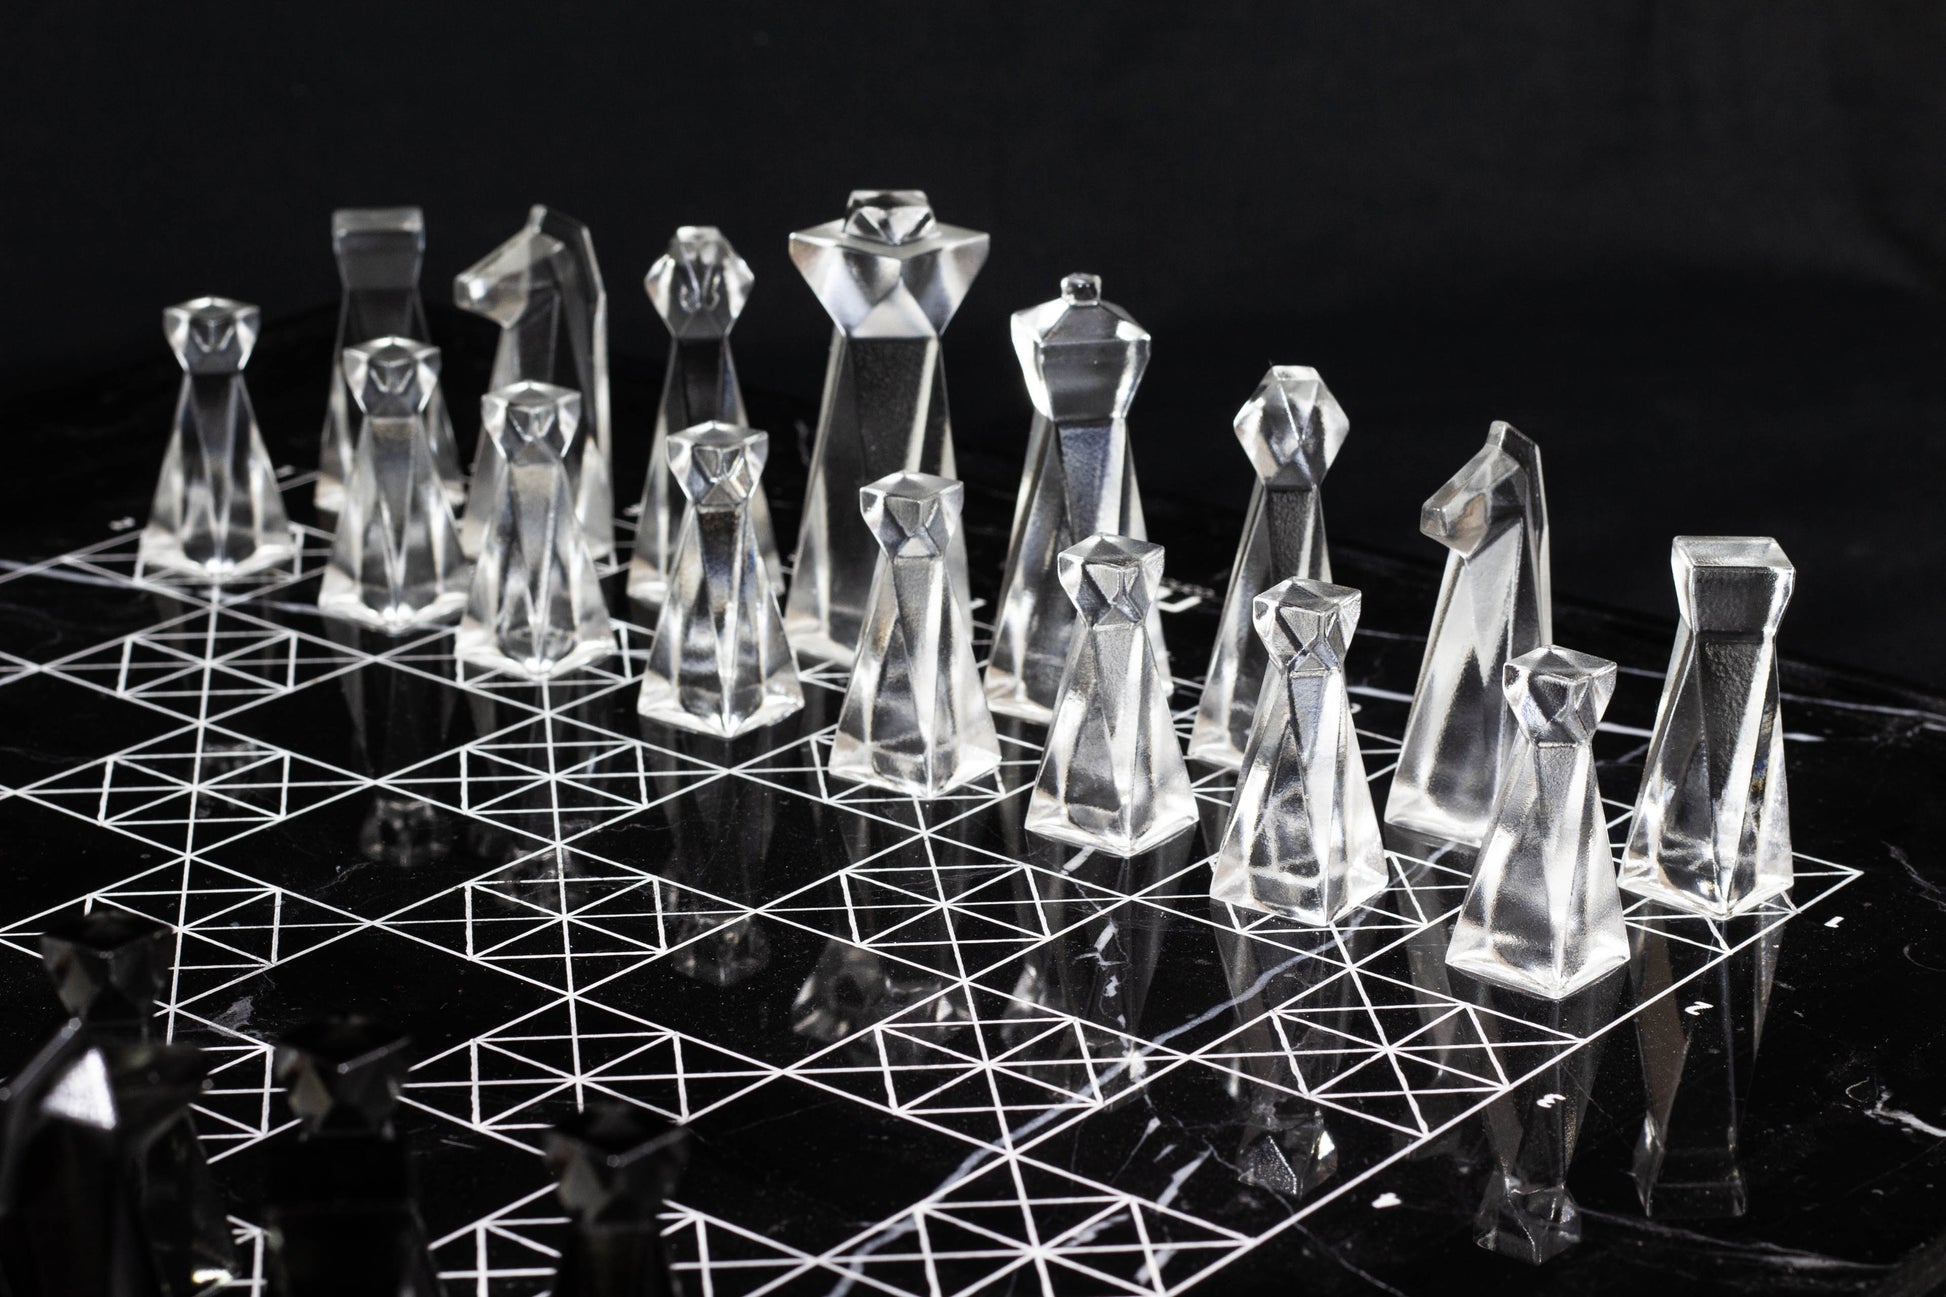 Luxurious Clear Crystal Chess Board Set